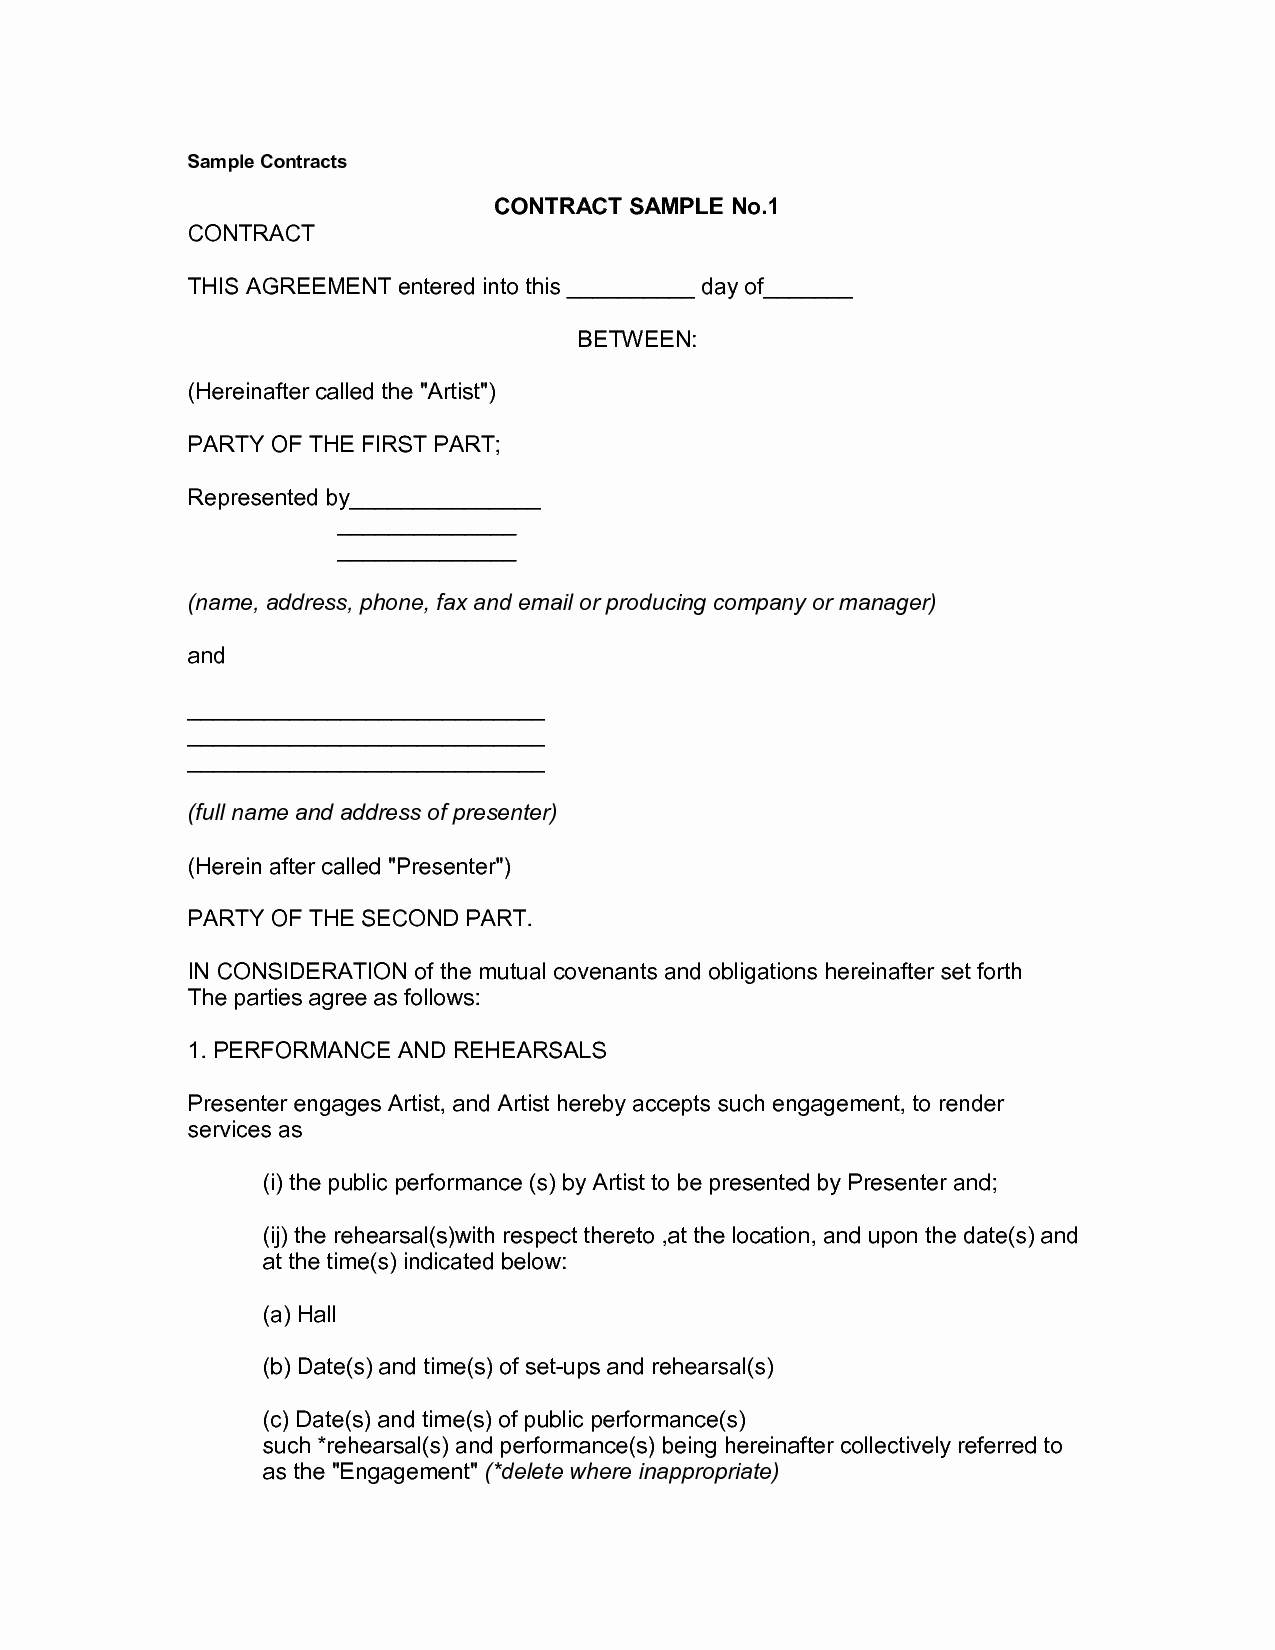 Simple Sales Agreement Template Luxury Basic Contract for Services Mughals